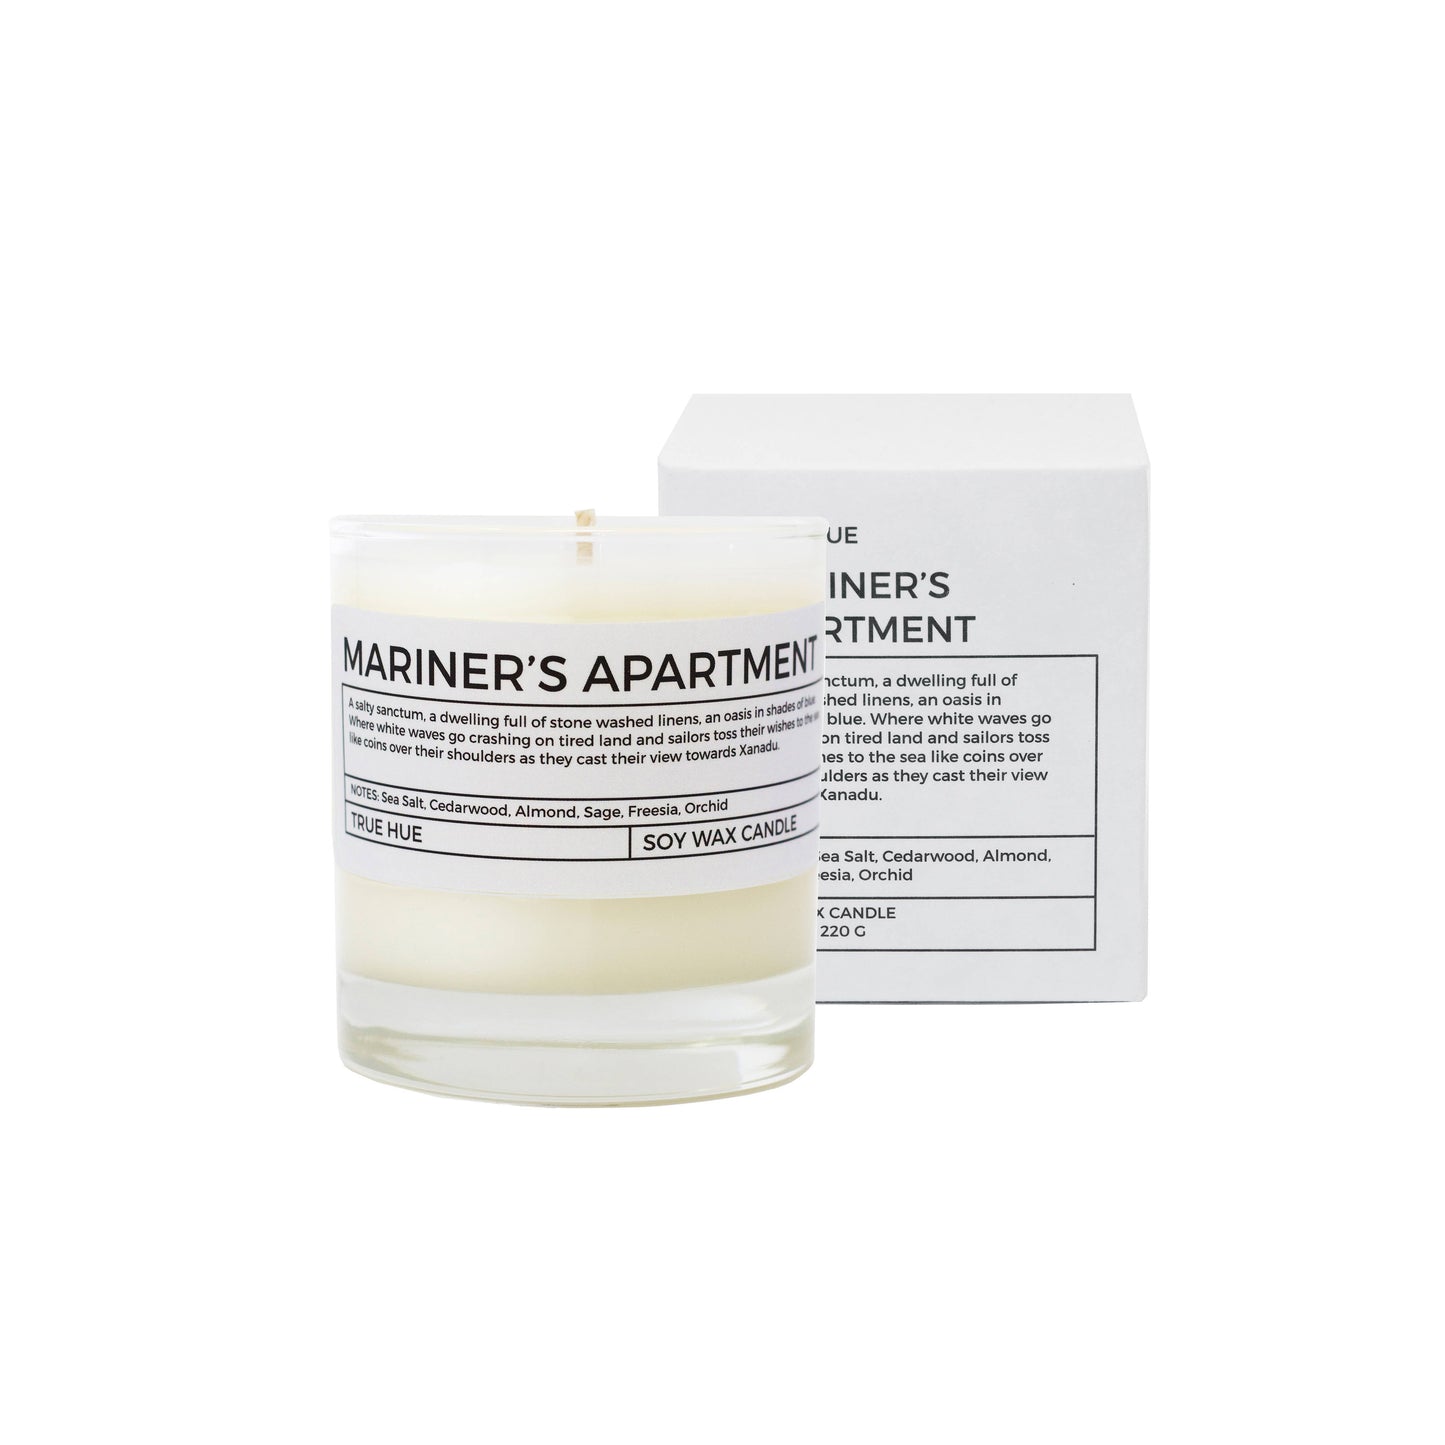 Mariner's Apartment Standard Soy Wax Candle